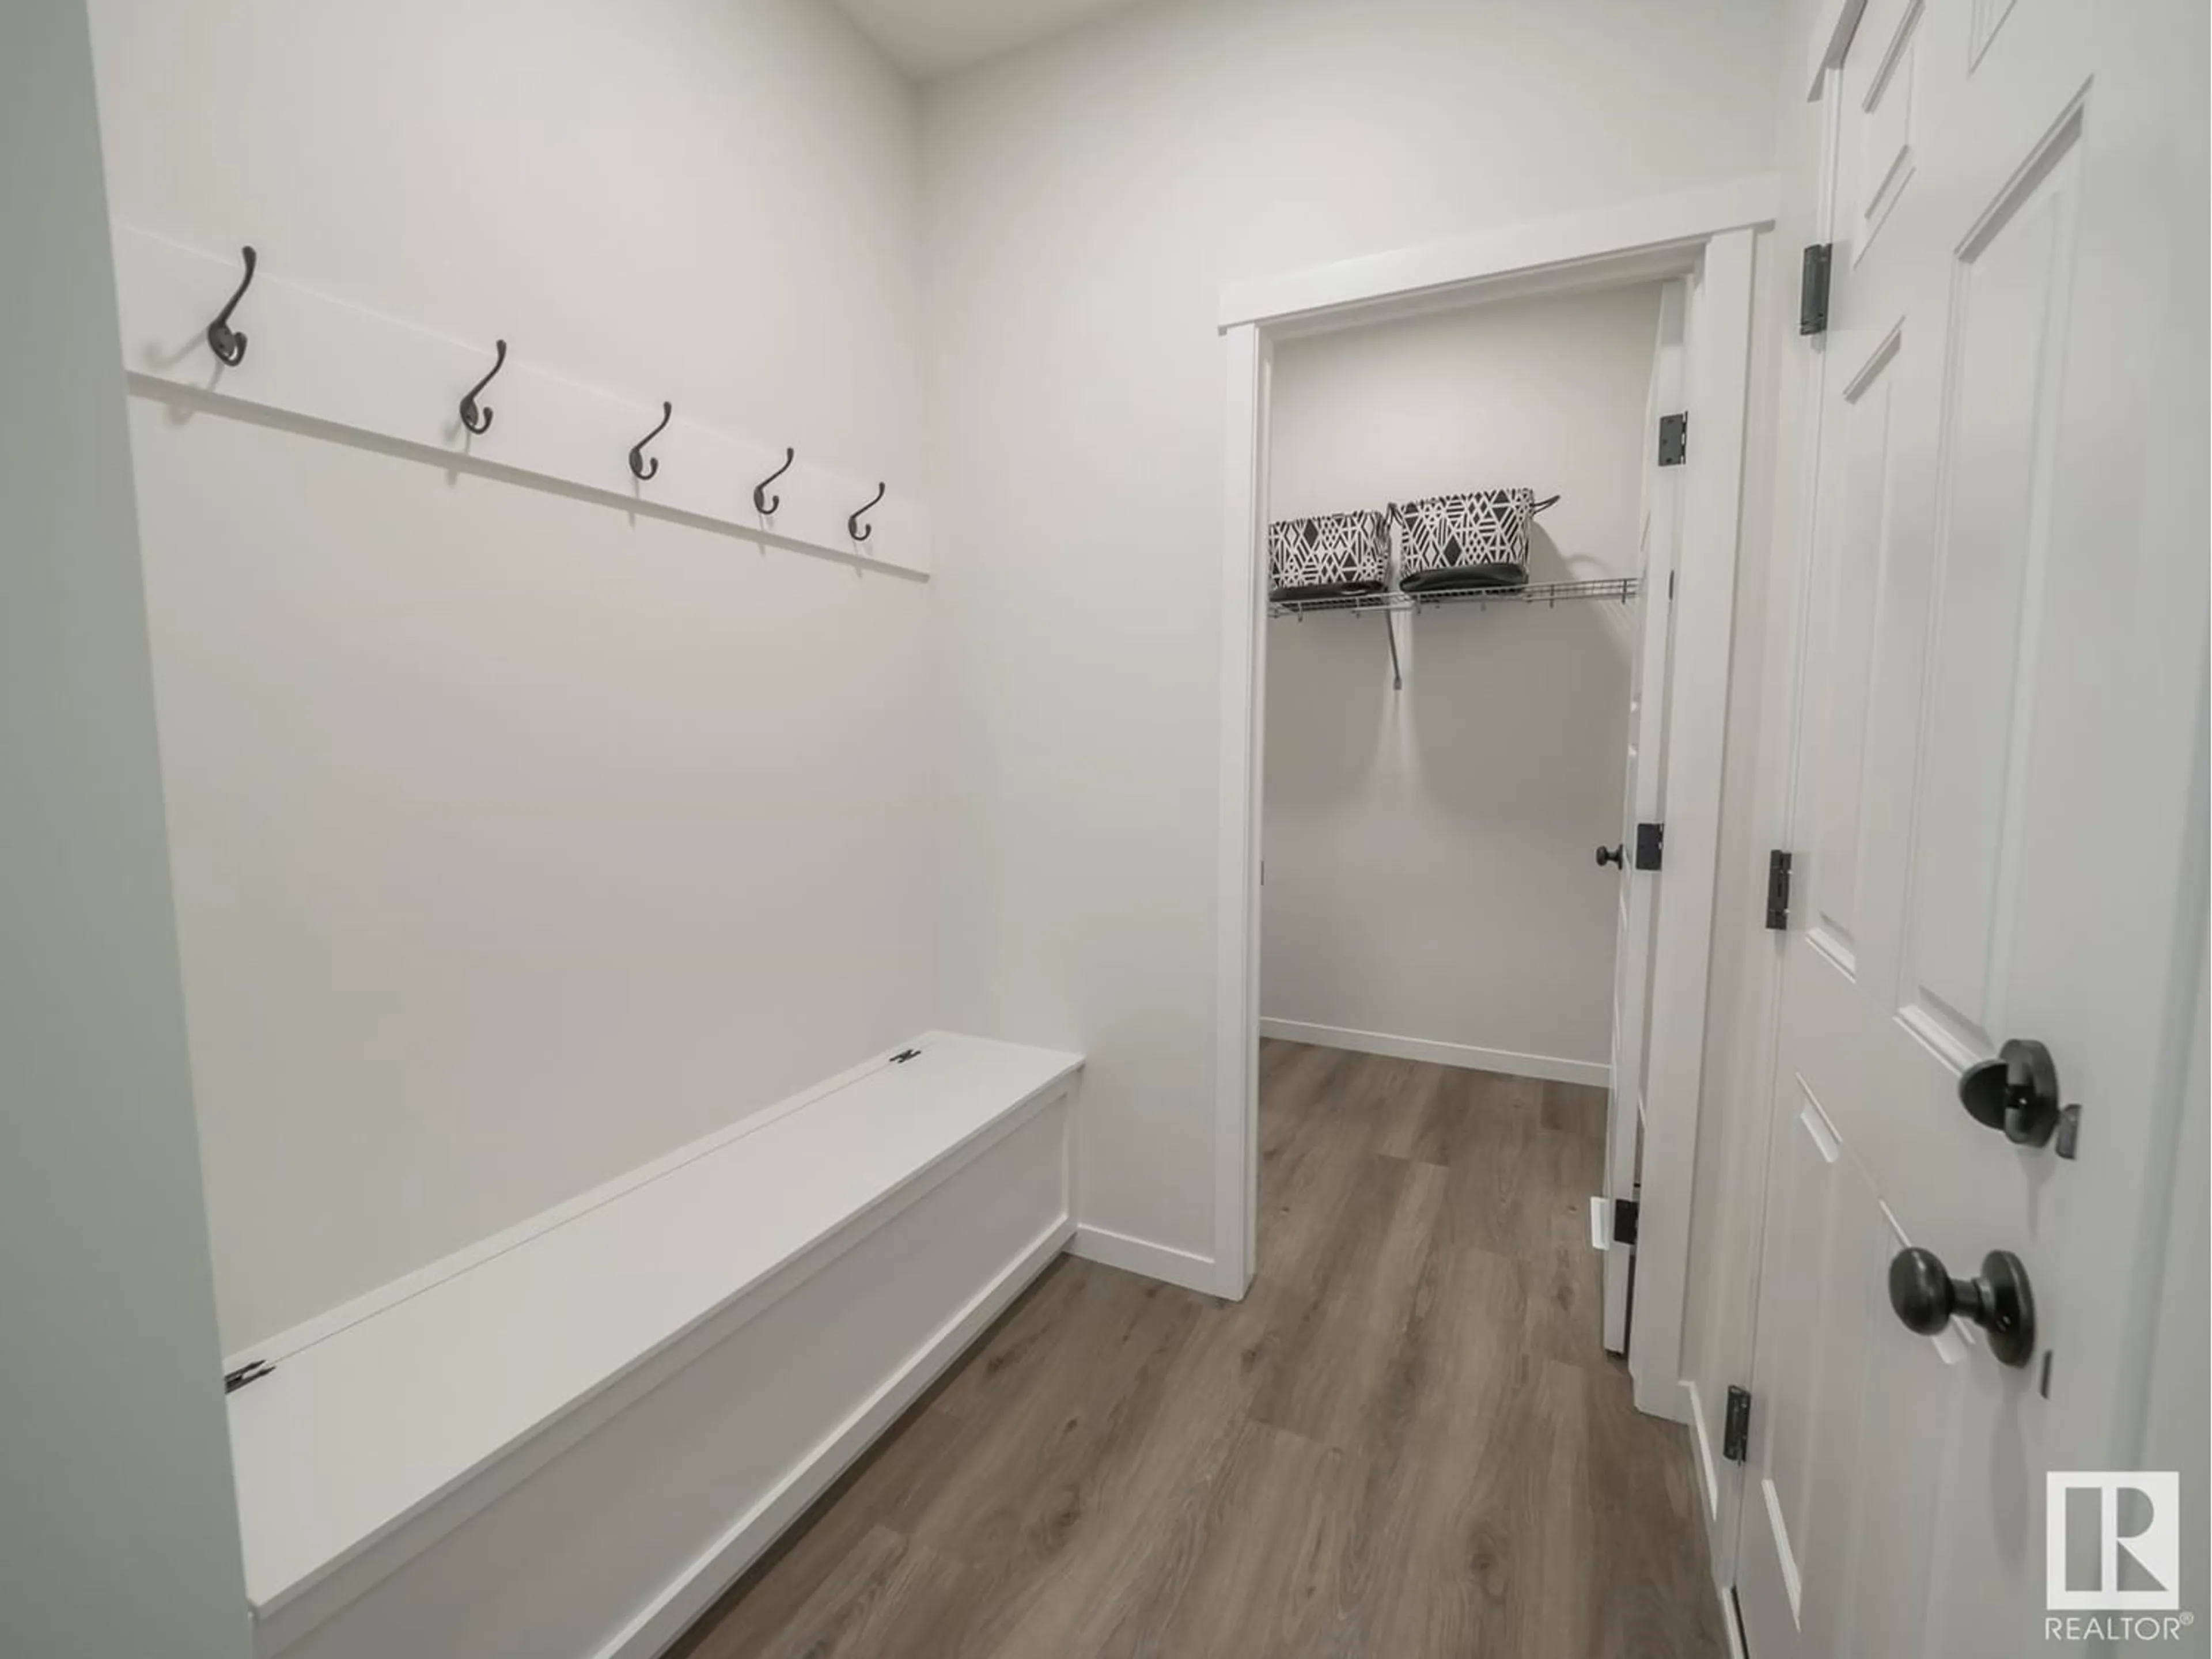 Storage room or clothes room or walk-in closet for 17323 3 ST NW, Edmonton Alberta T5Y4G8